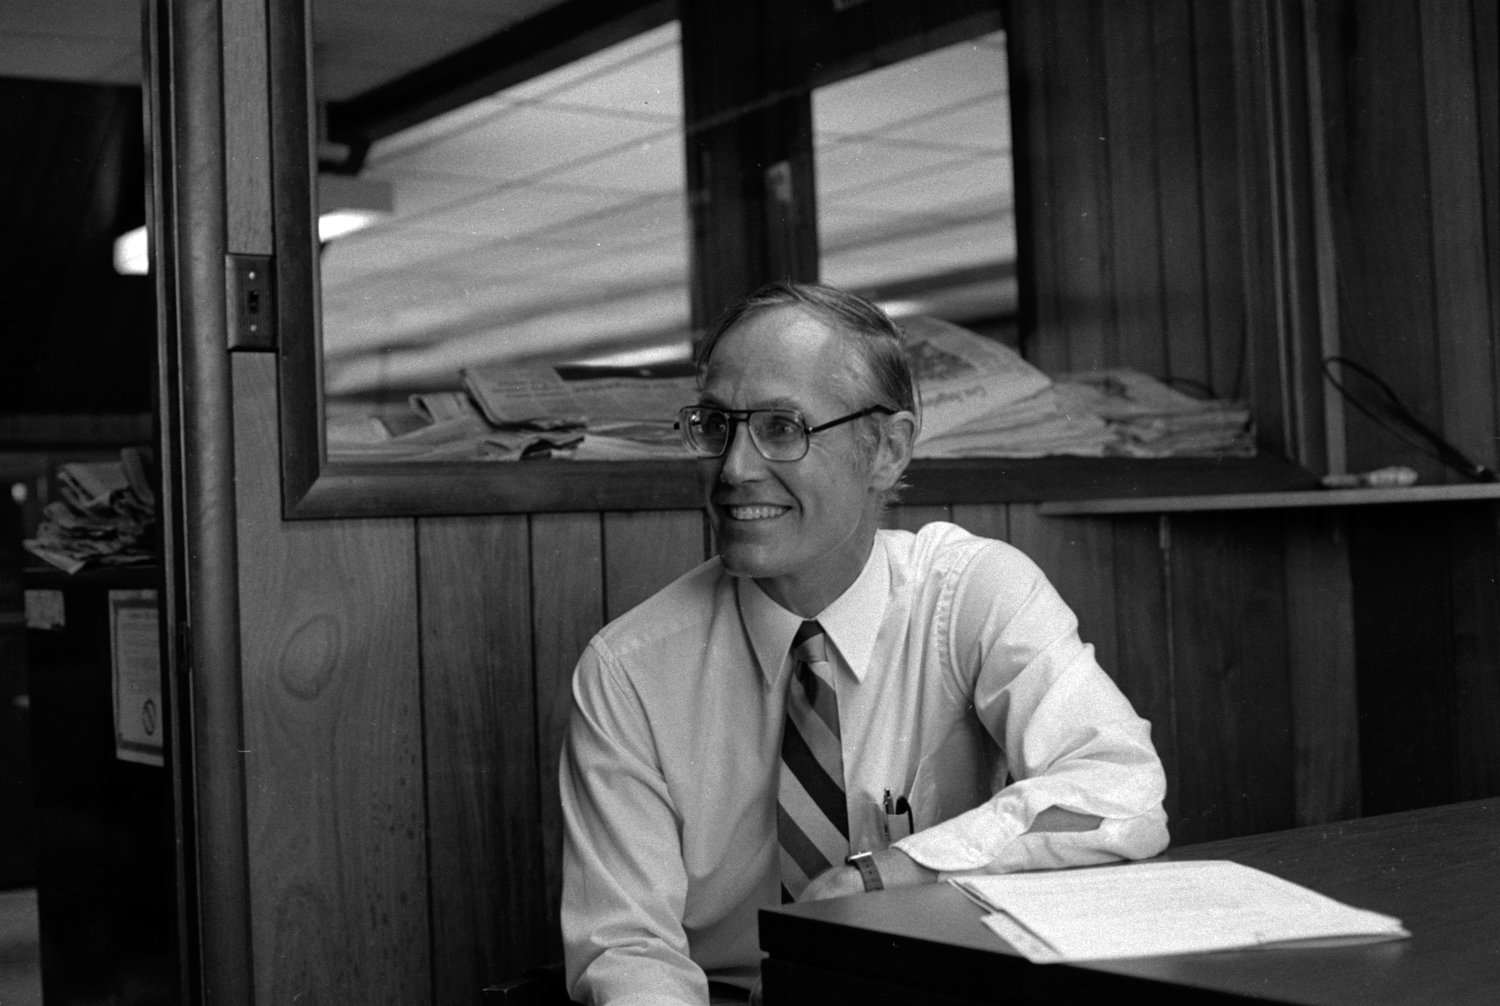 Slade Gorton smiles during a visit to The Chronicle’s office in this 1980 archival photograph.